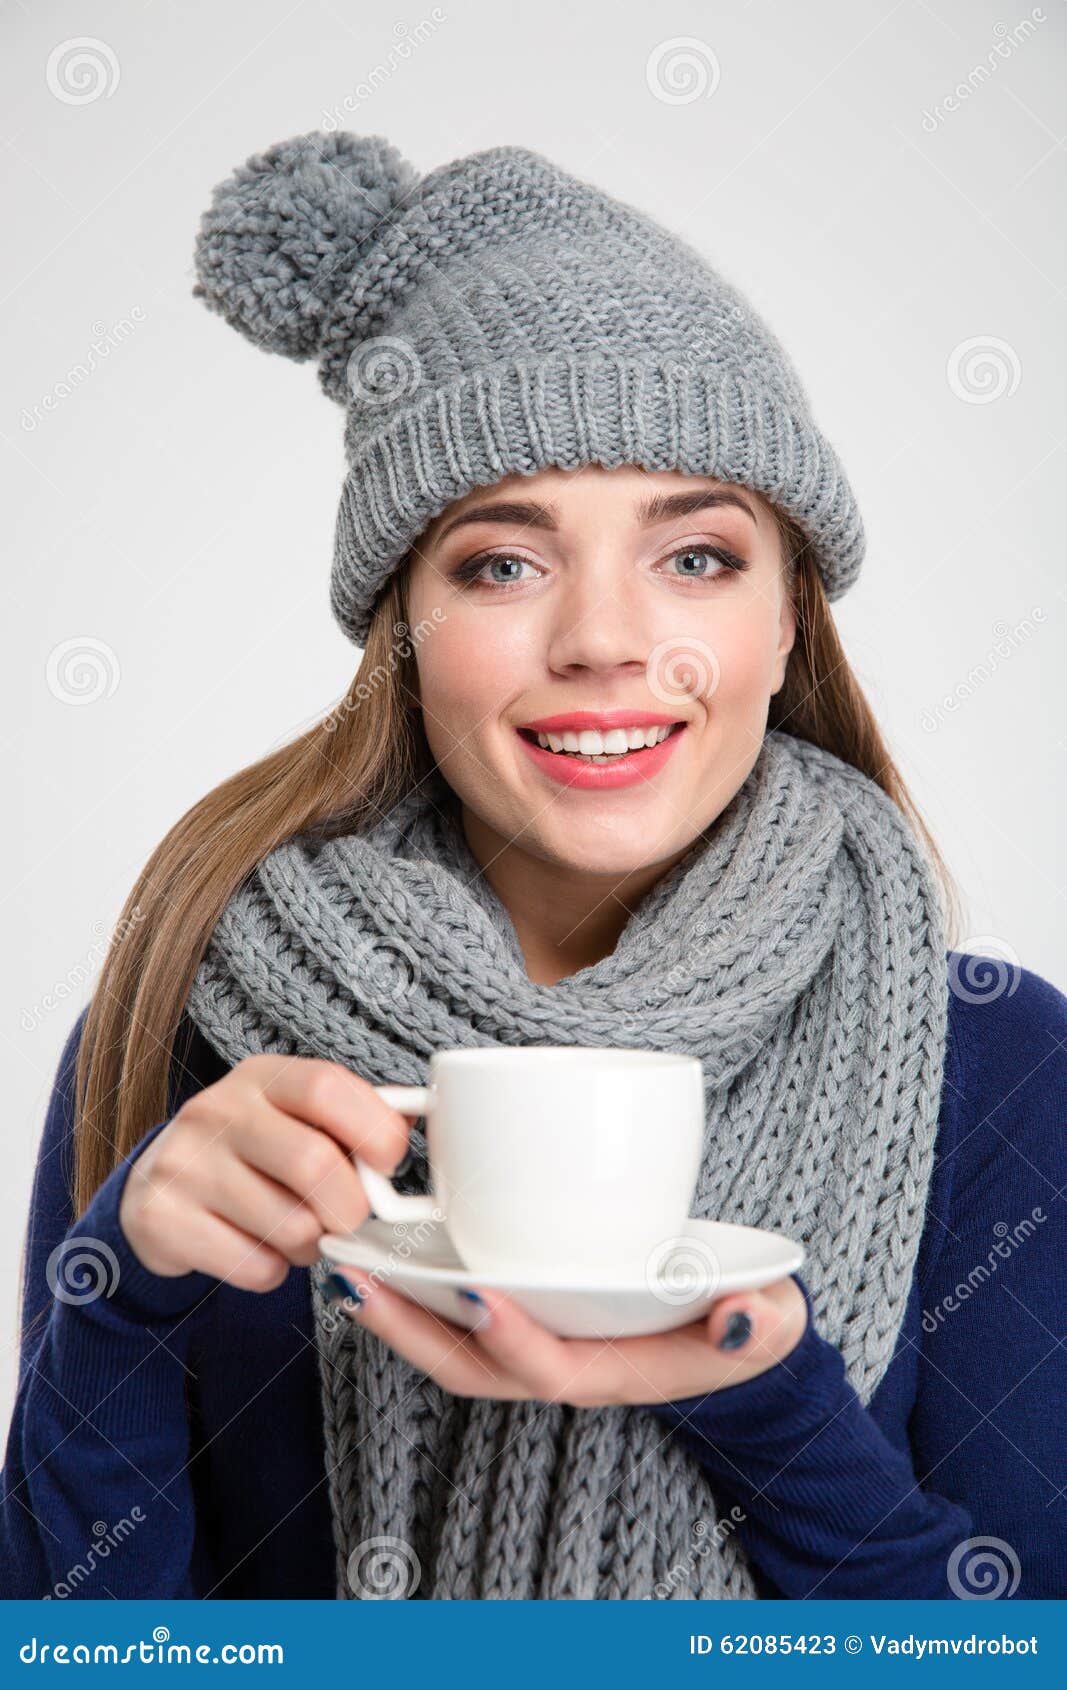 Woman Wearing in Scarf and Hat Holding Cup with Coffee Stock Image ...